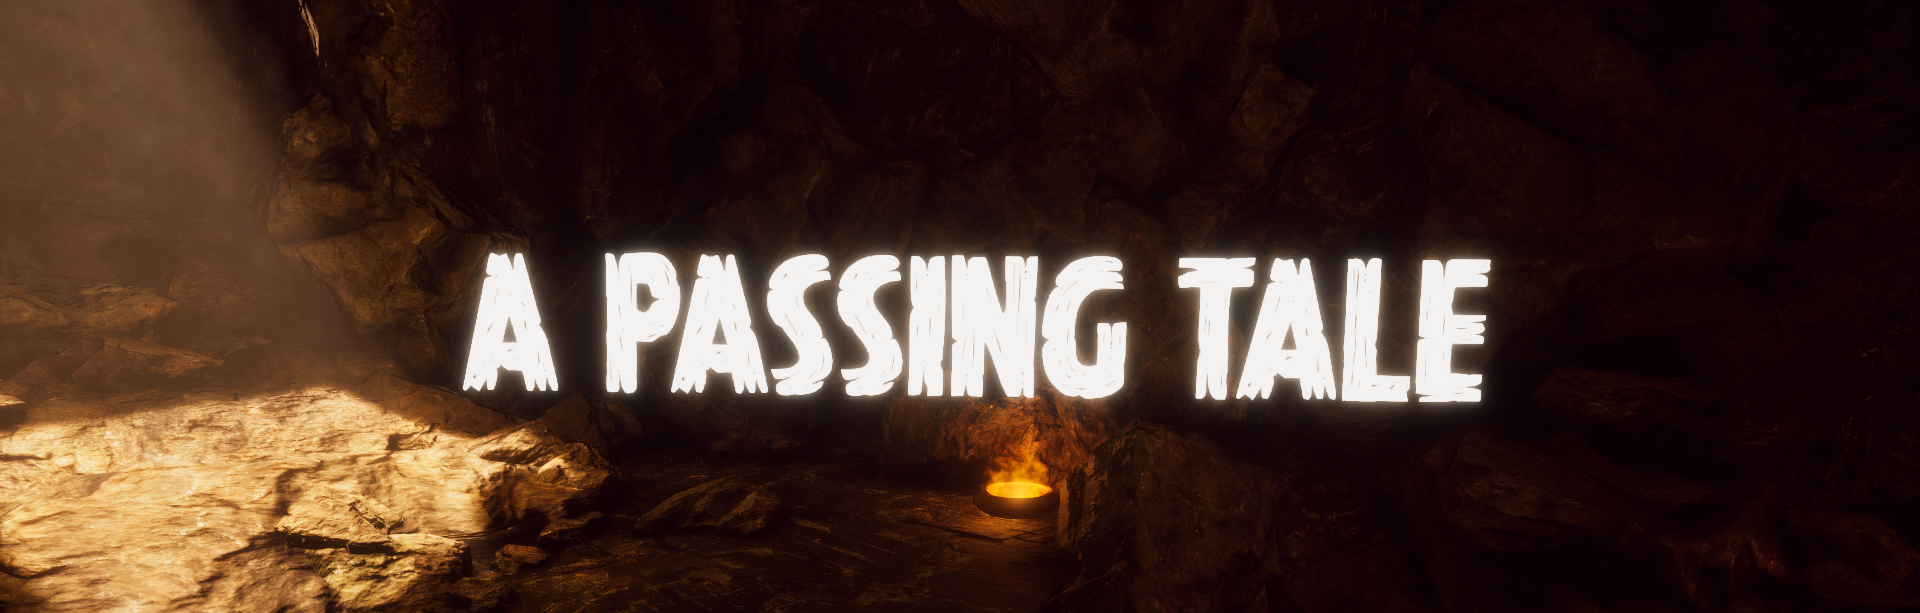 A Passing Tale